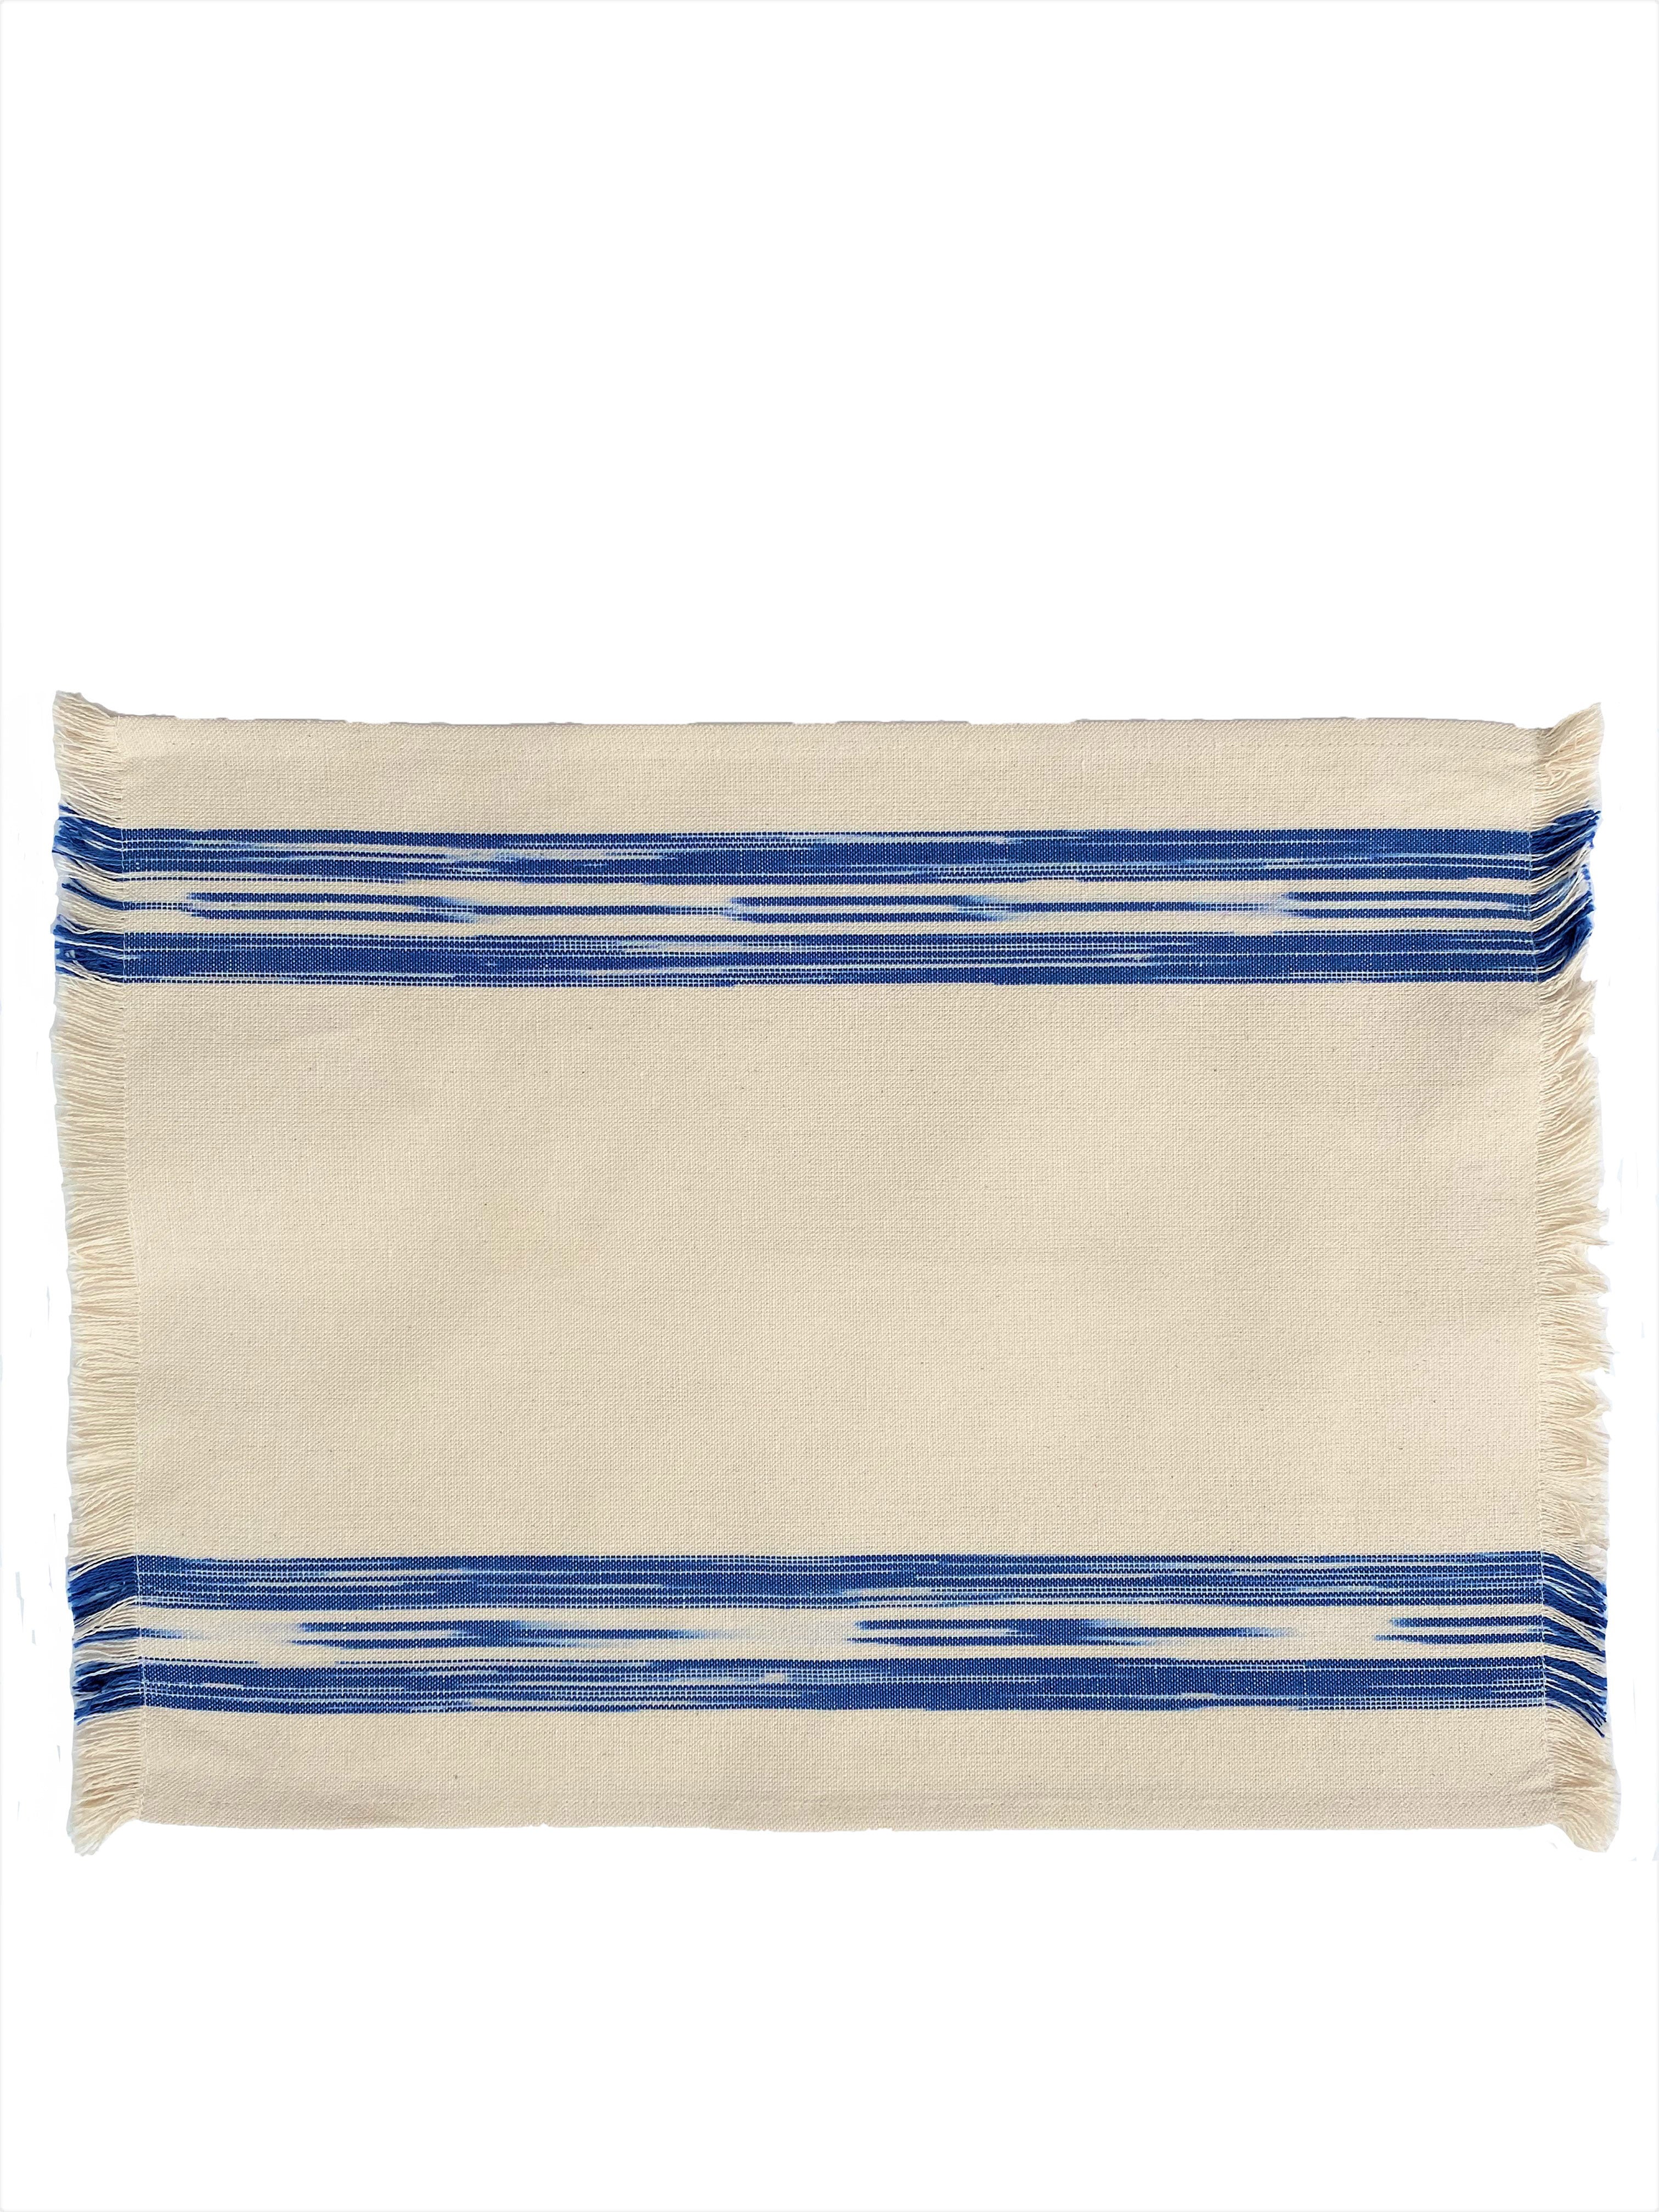 FABRIC PLACEMAT - CREAM WITH BLUE IKAT STRIPE